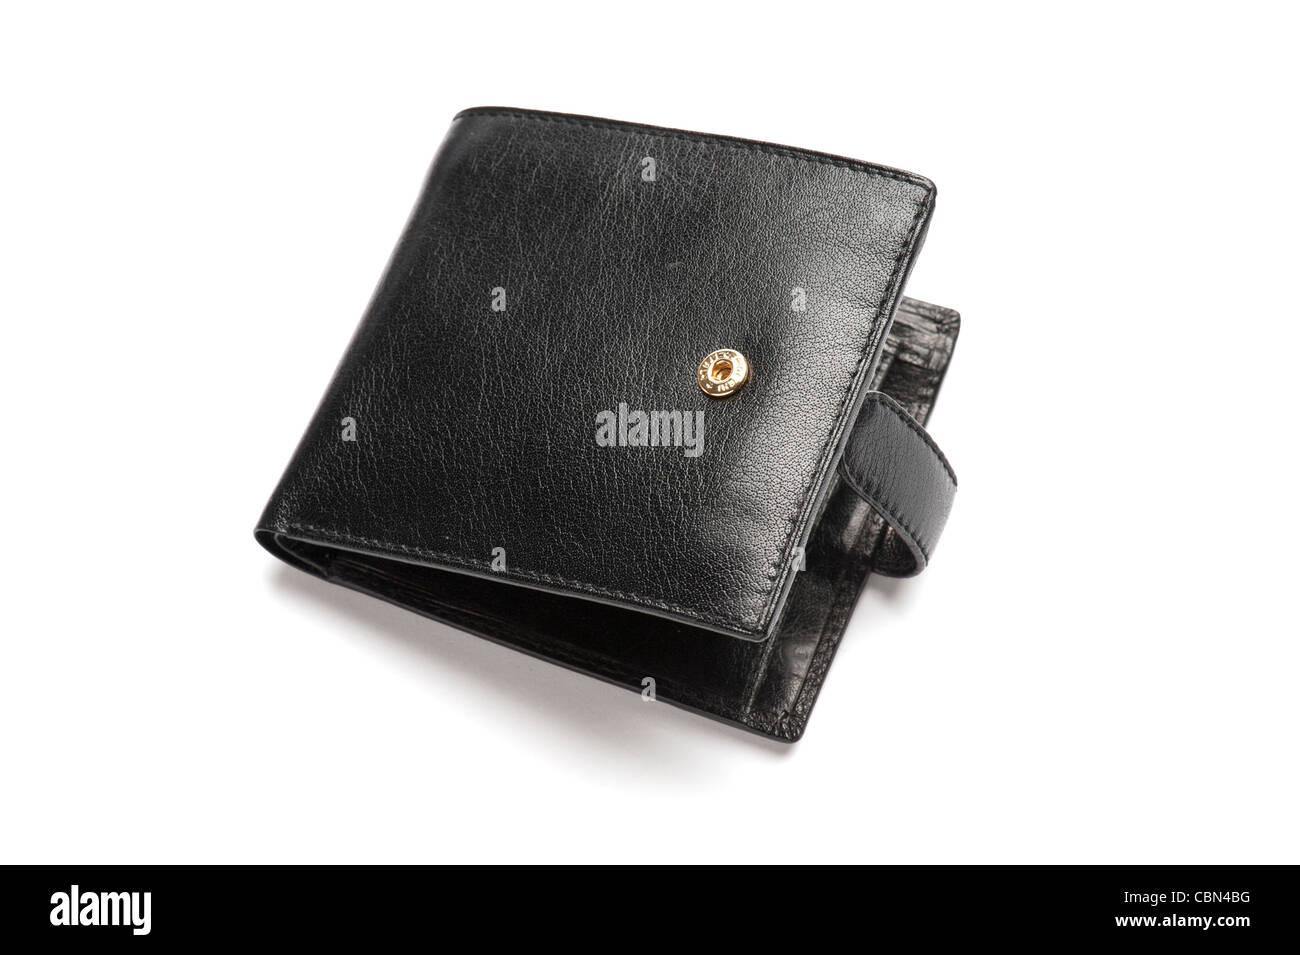 A black leather wallet, close-up Stock Photo